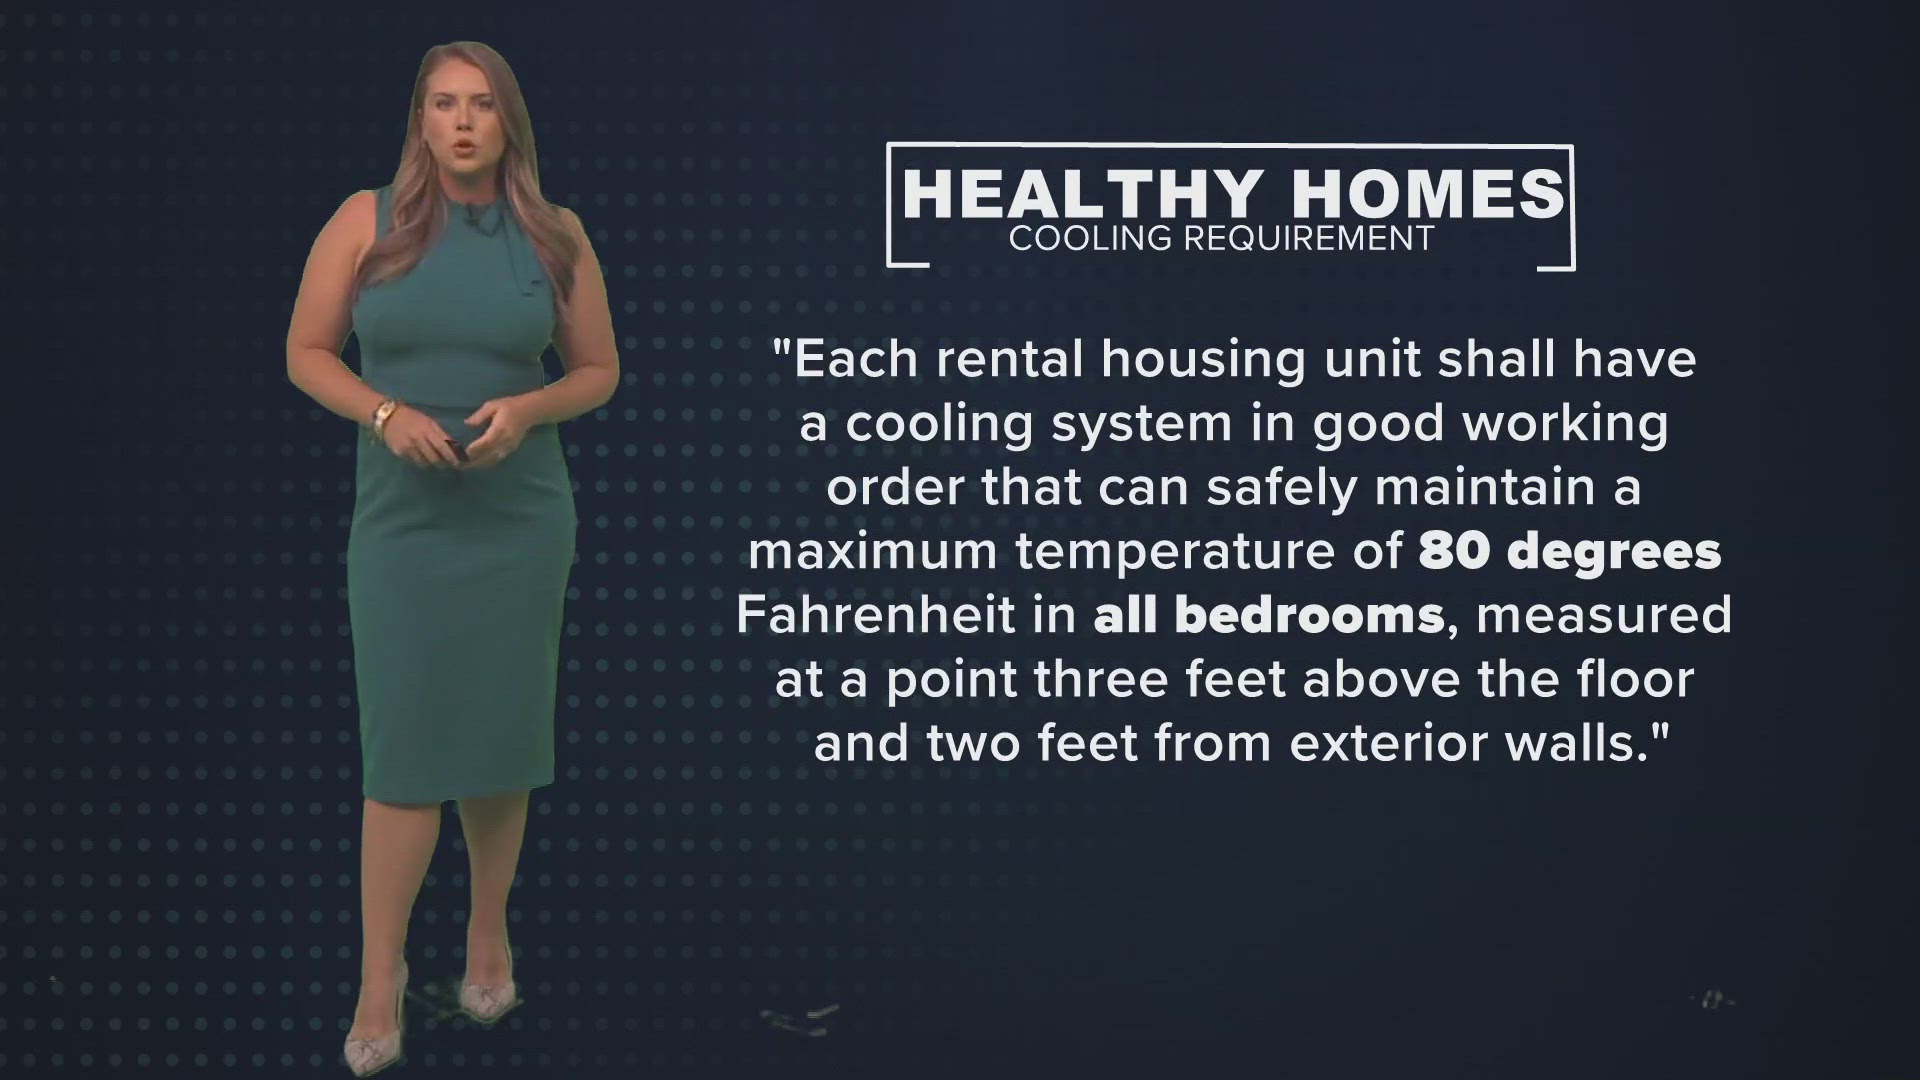 In your Breakdown: in our sweltering Louisiana summers, if it’s too hot in the home or apartment you rent, what are your rights?